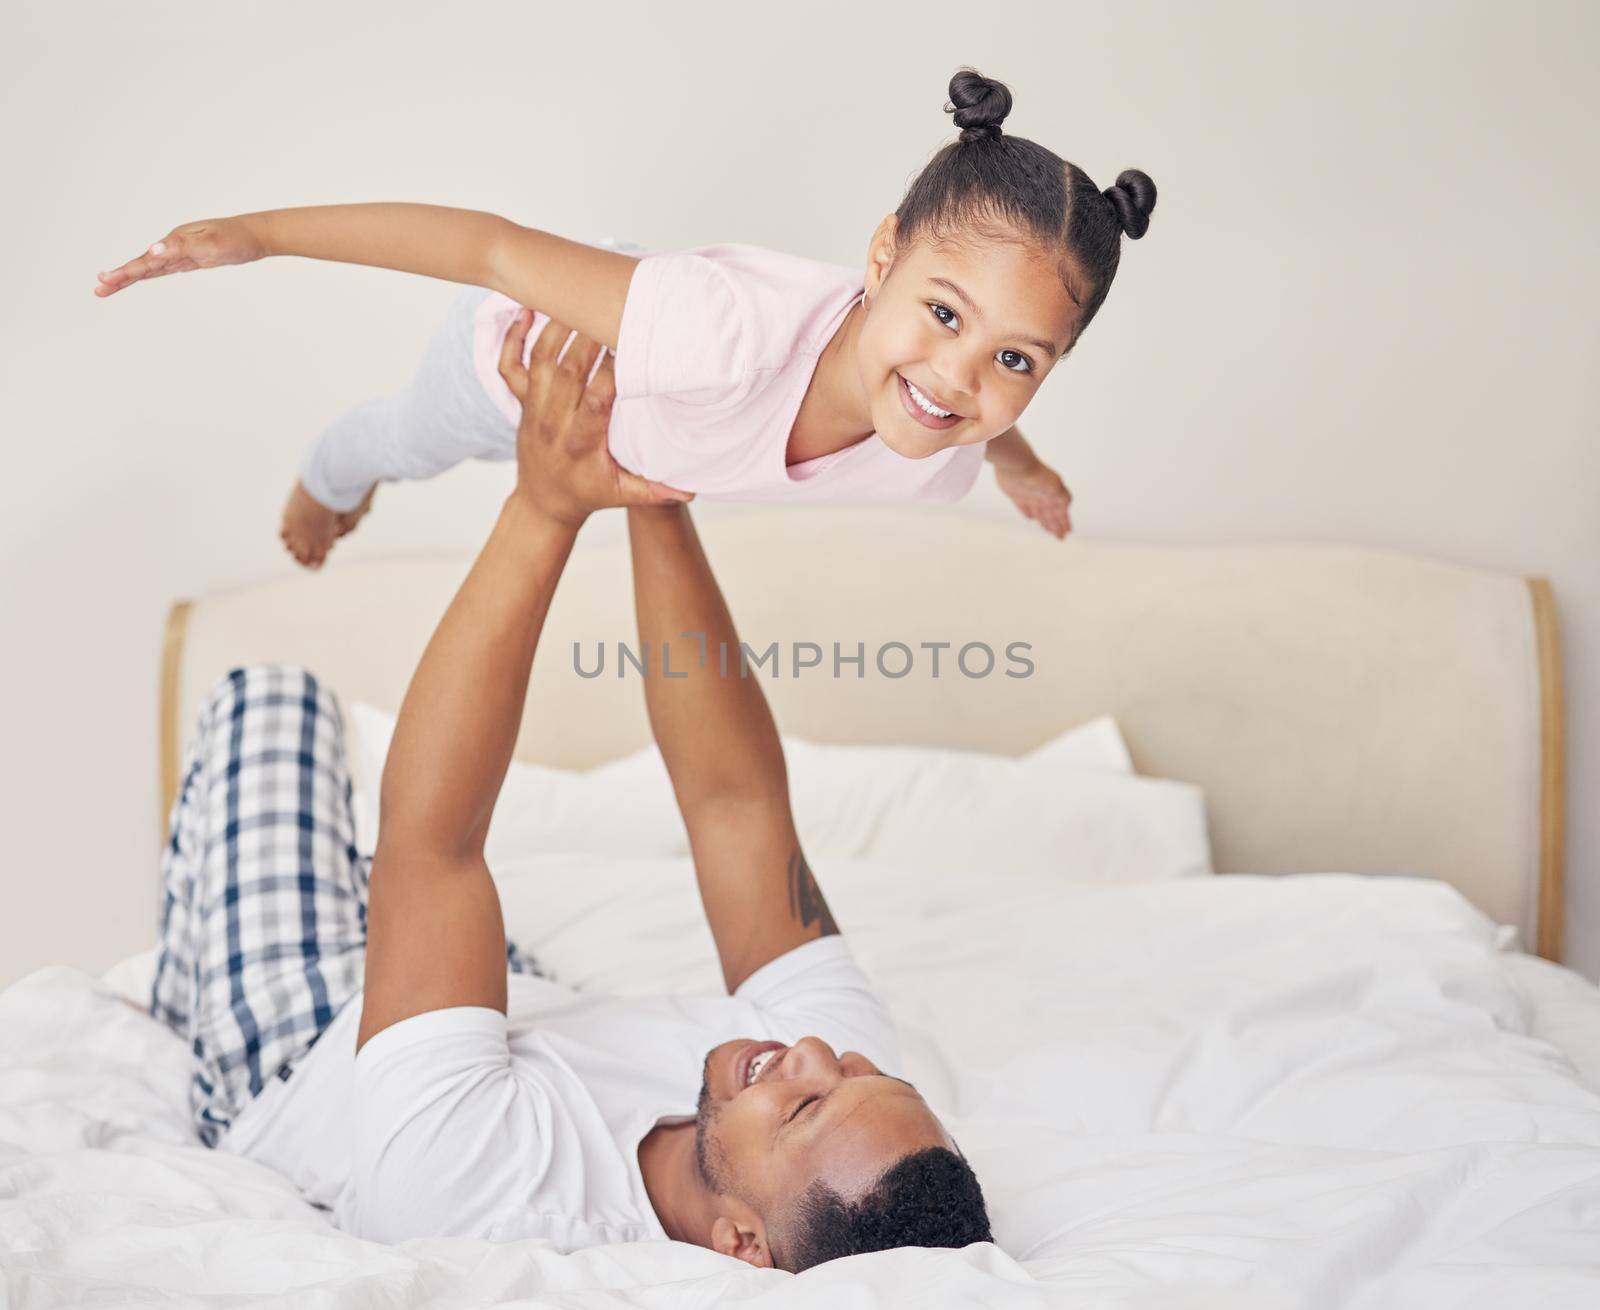 Joyful young father lying on bed, lifting excited happy little child daughter at home. Carefree family having fun in bedroom.